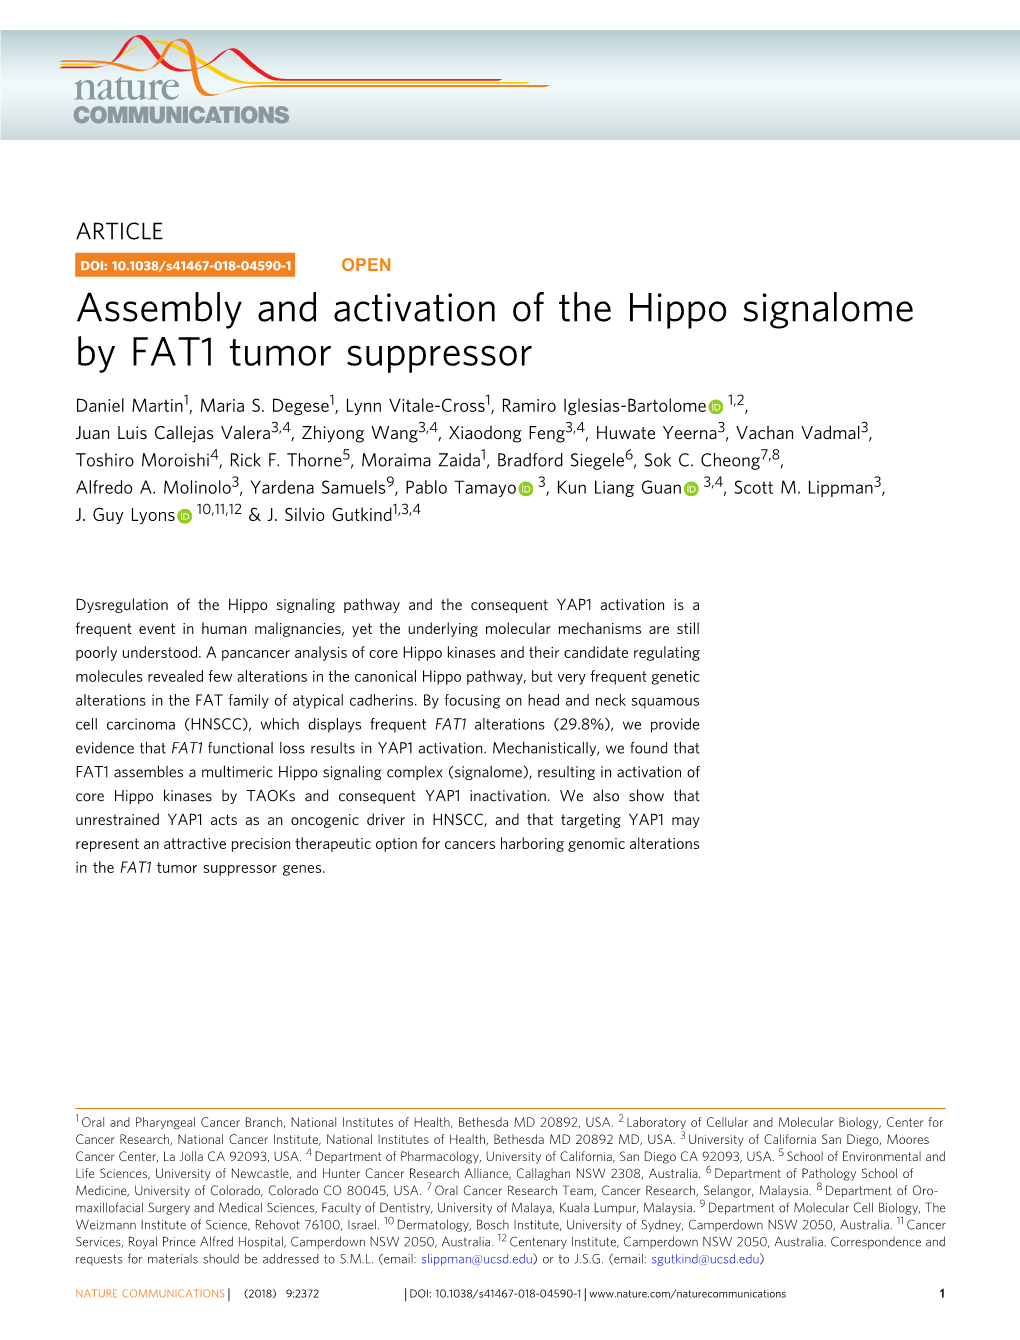 Assembly and Activation of the Hippo Signalome by FAT1 Tumor Suppressor